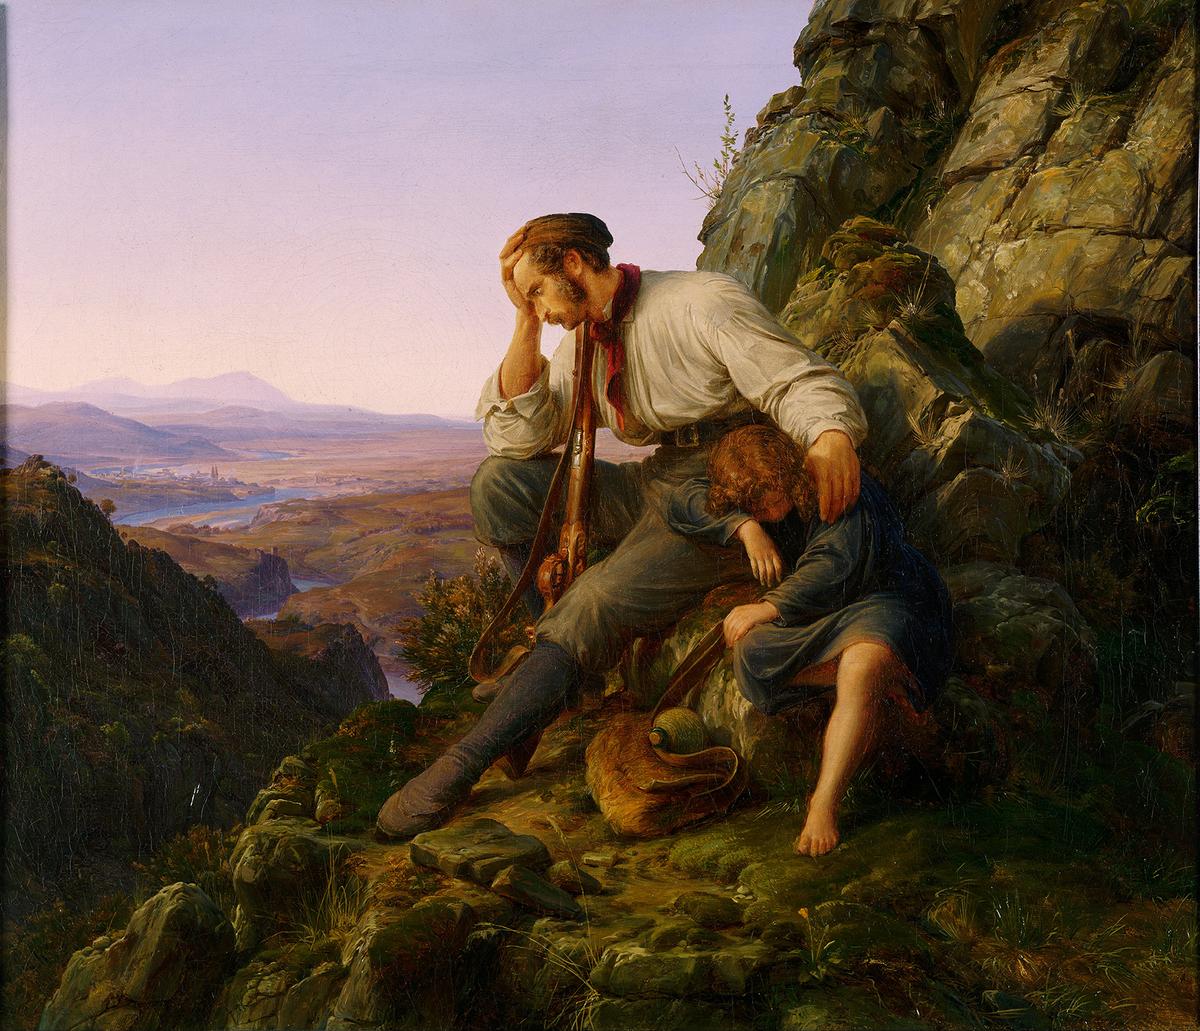 The father has only one object that he will pursue even to the point of death: to care for the son. "The Robber and His Child," 1832, by Karl Friedrich Lessing. Oil on canvas. Philadelphia Museum of Art. (Public Domain)